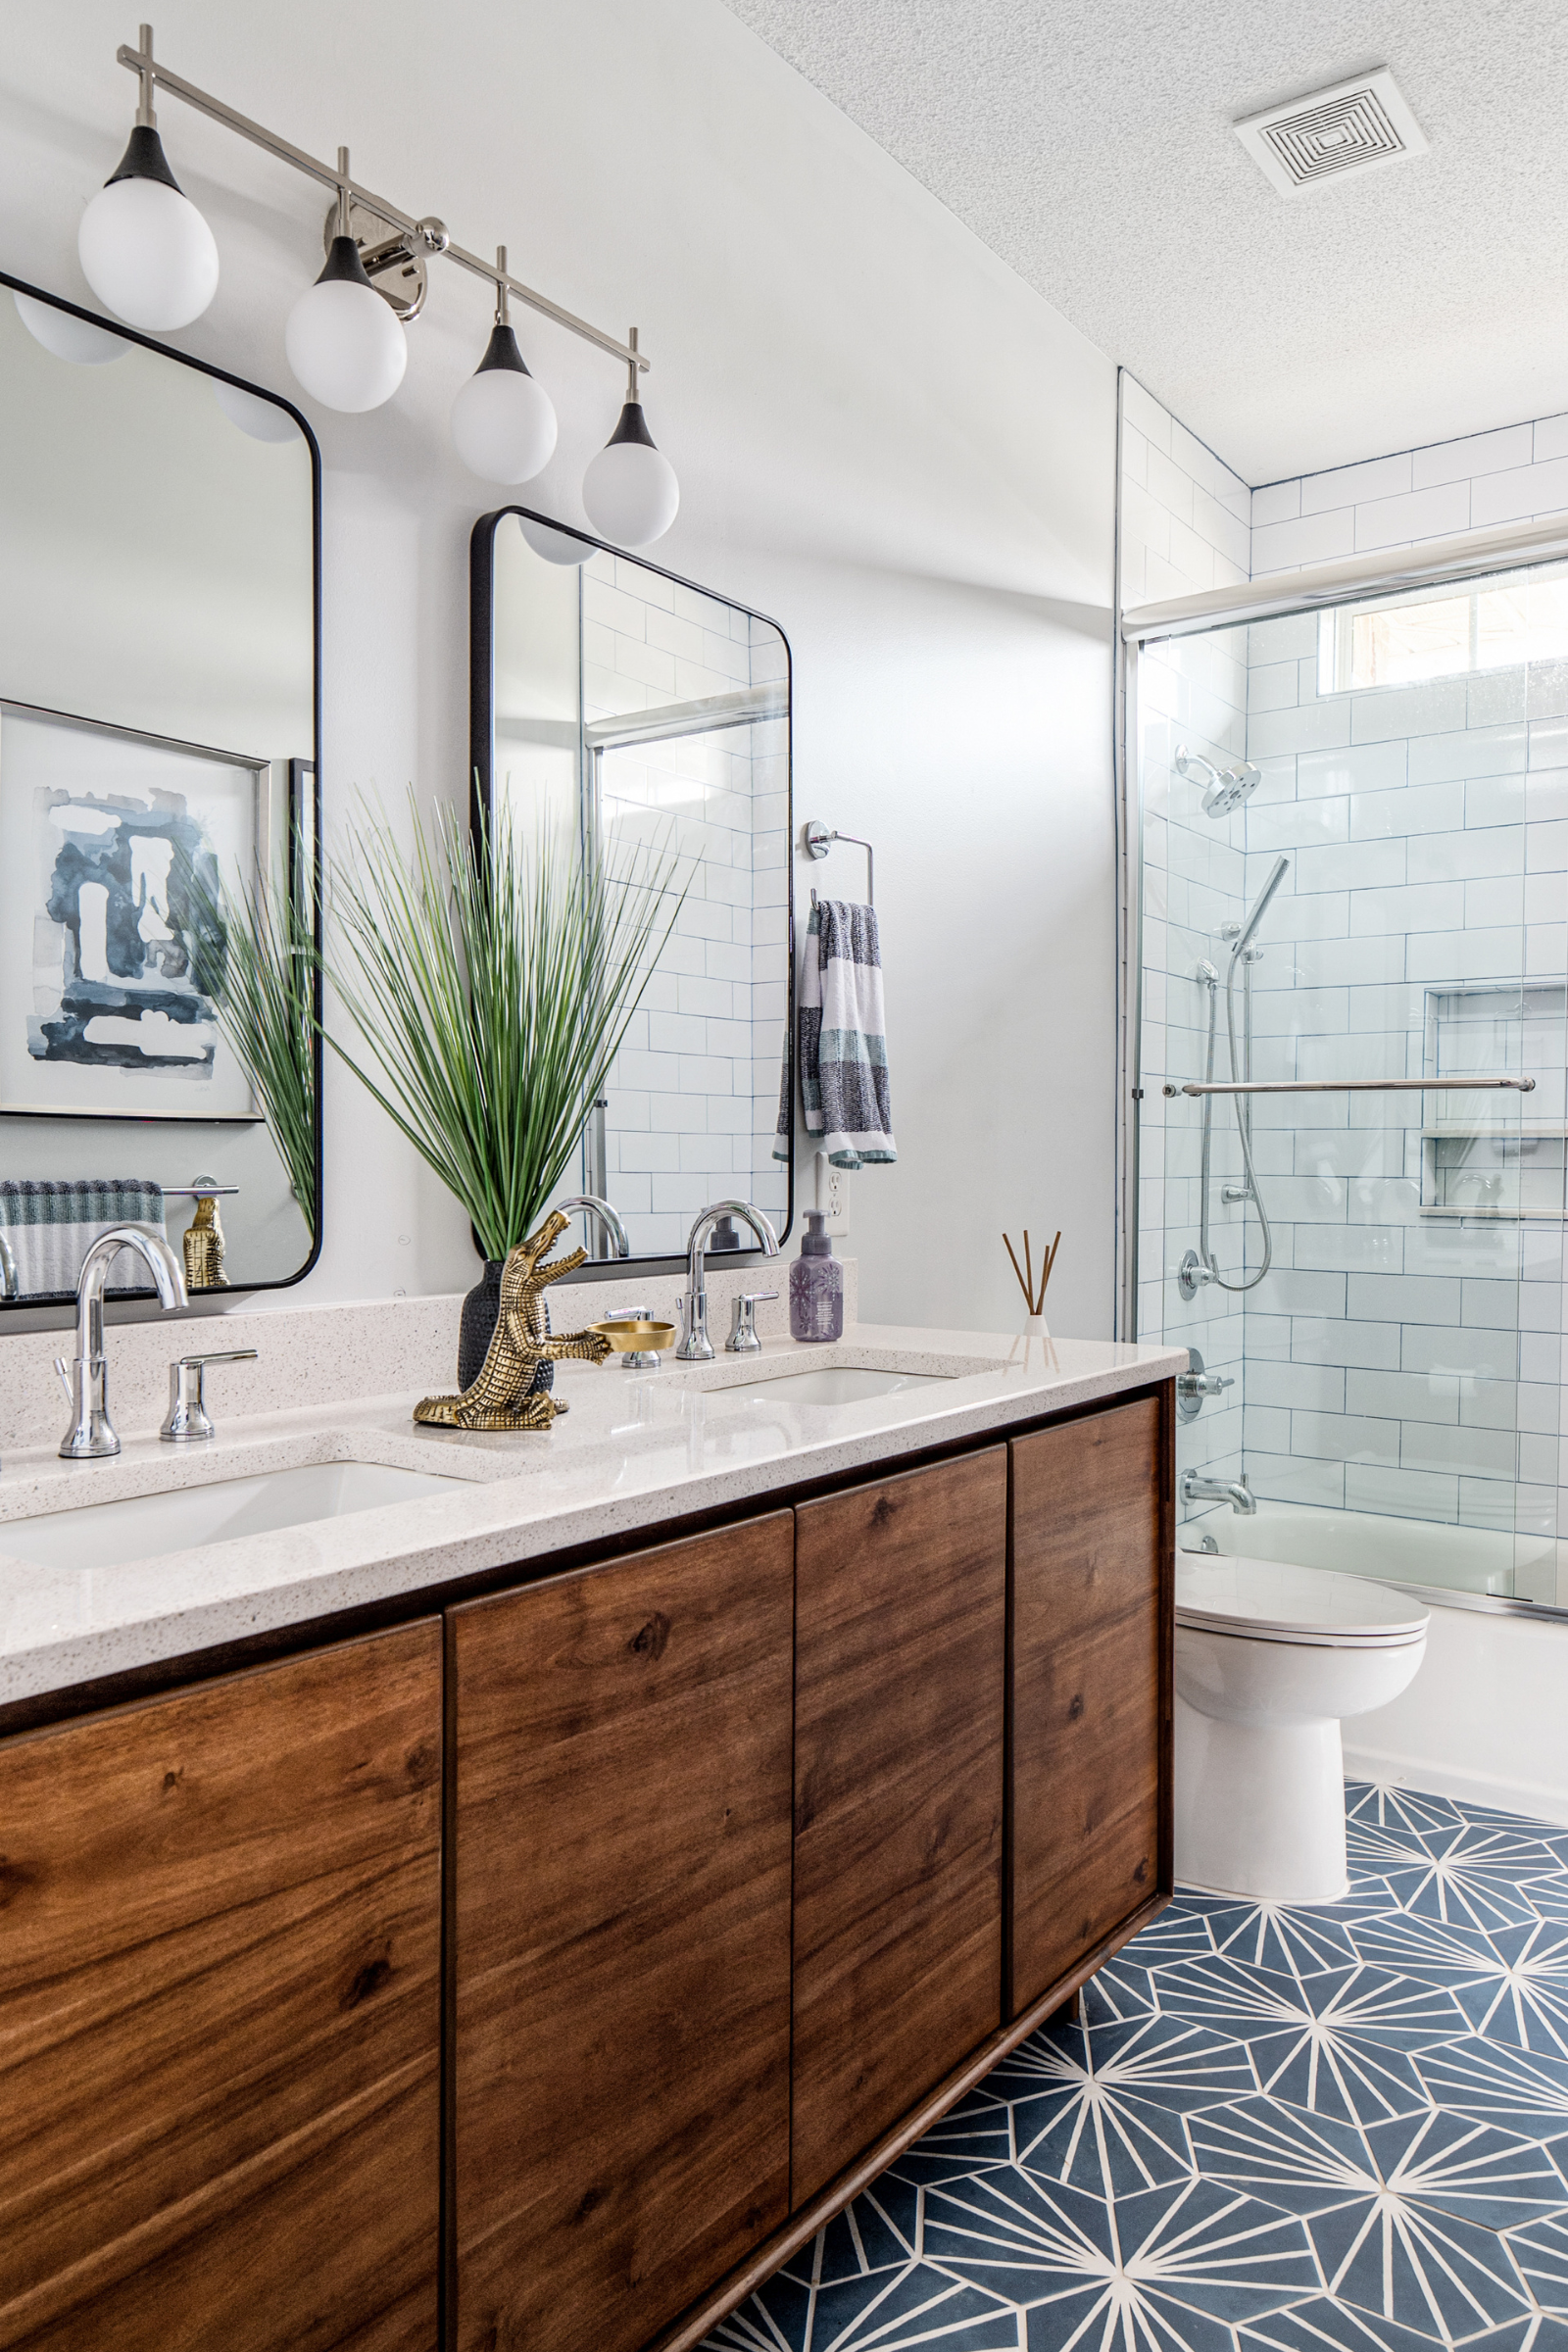 Mid-century wood vanity and hexagon tiles in a blue and white bathroom remodel